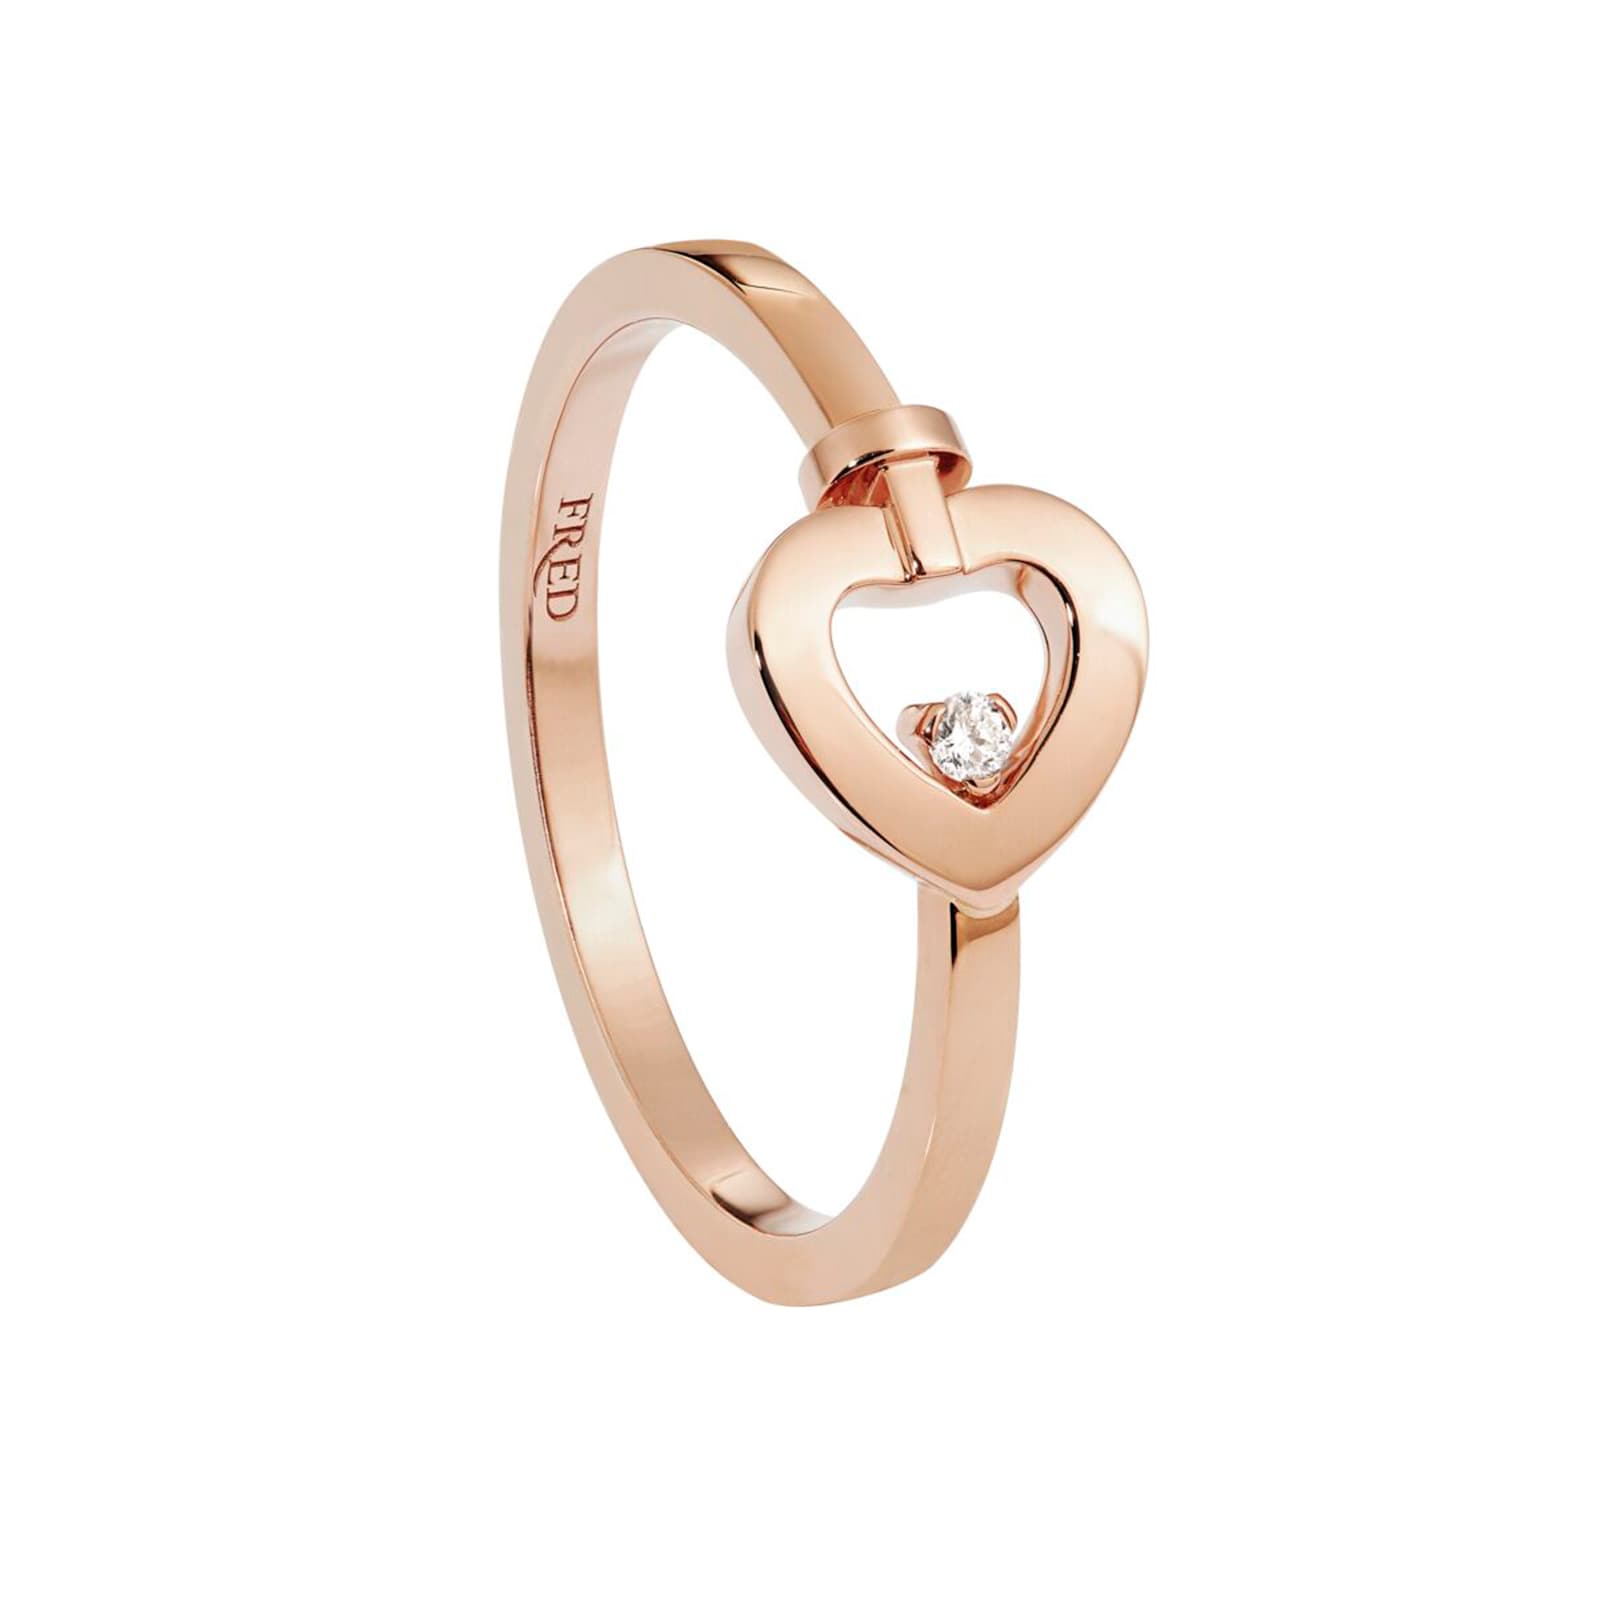 Pretty Woman 18ct Rose Gold 0.02ct Diamond Ring - Ring Size M